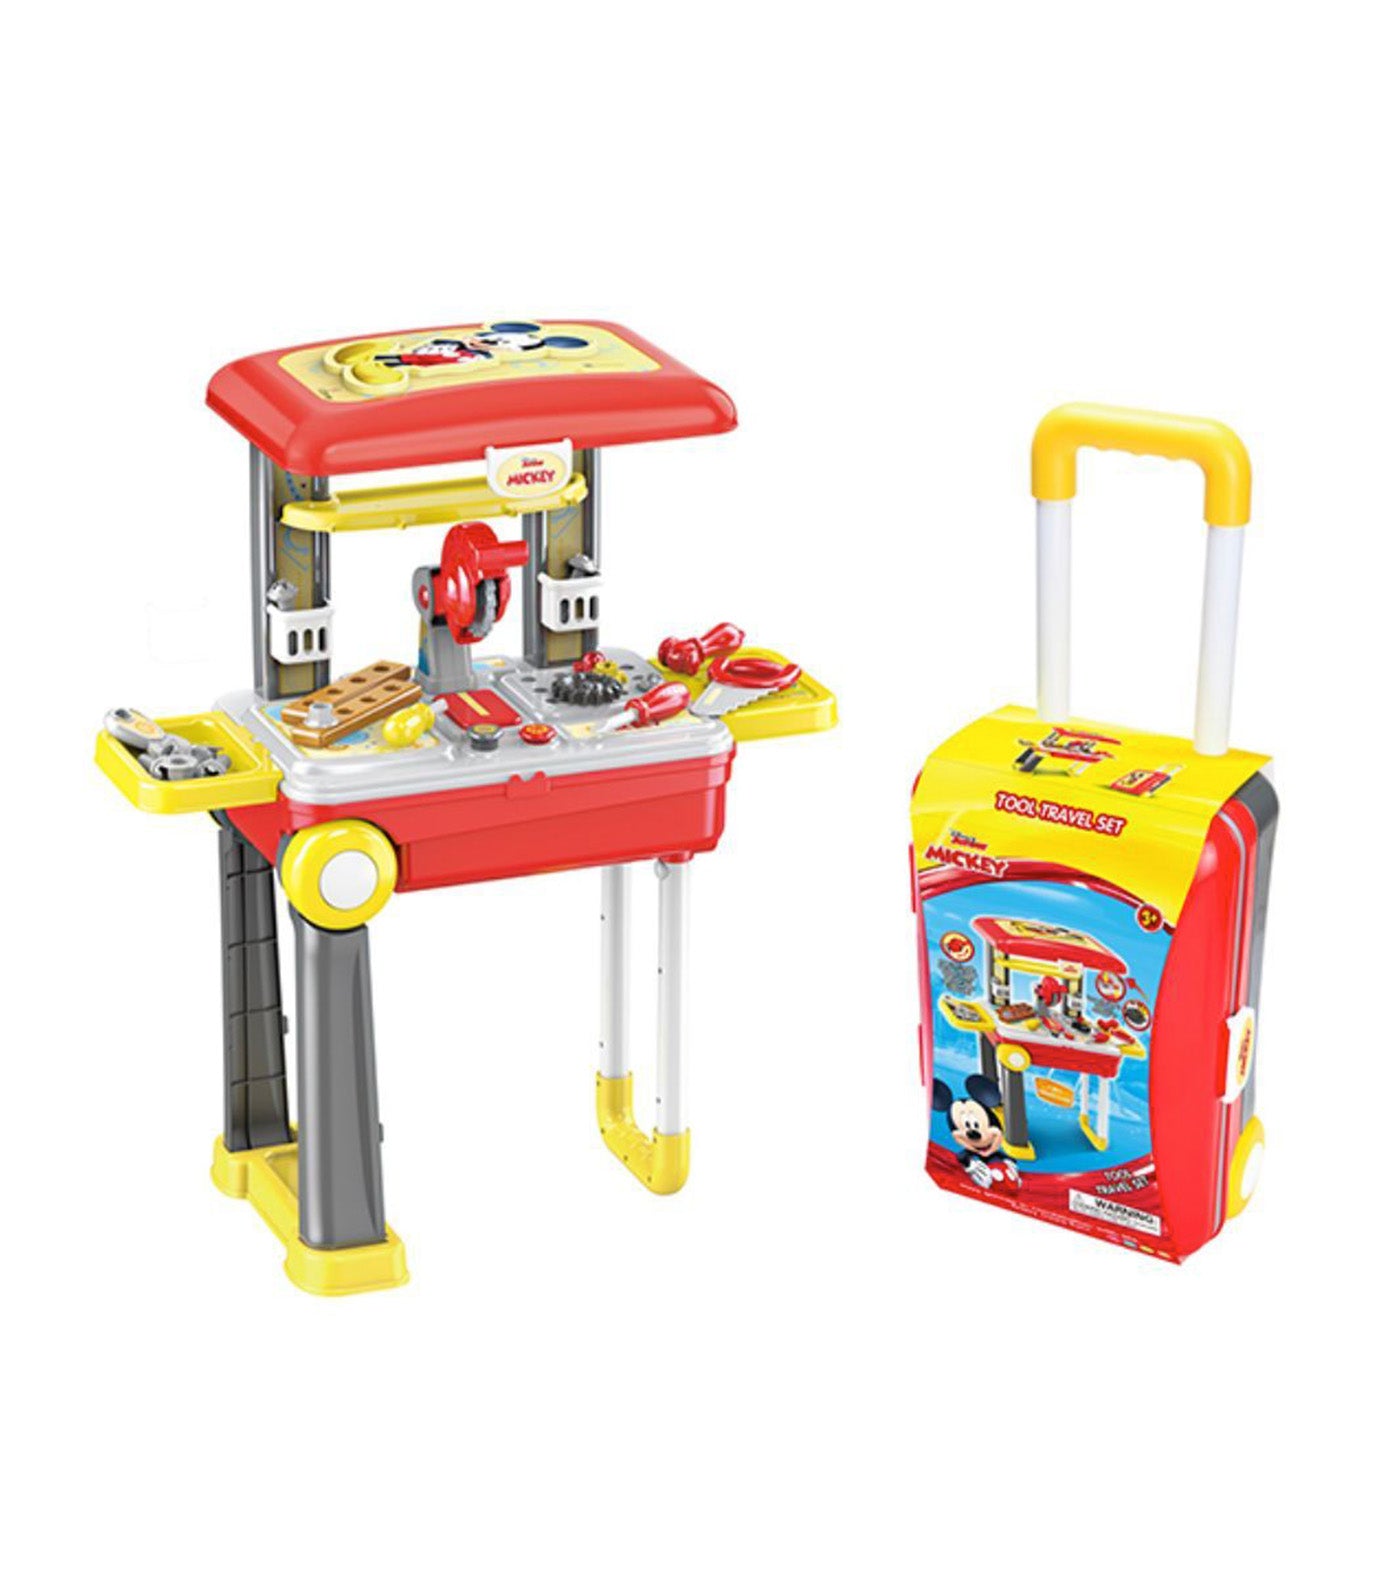 Mickey Mouse Tool Travel Set